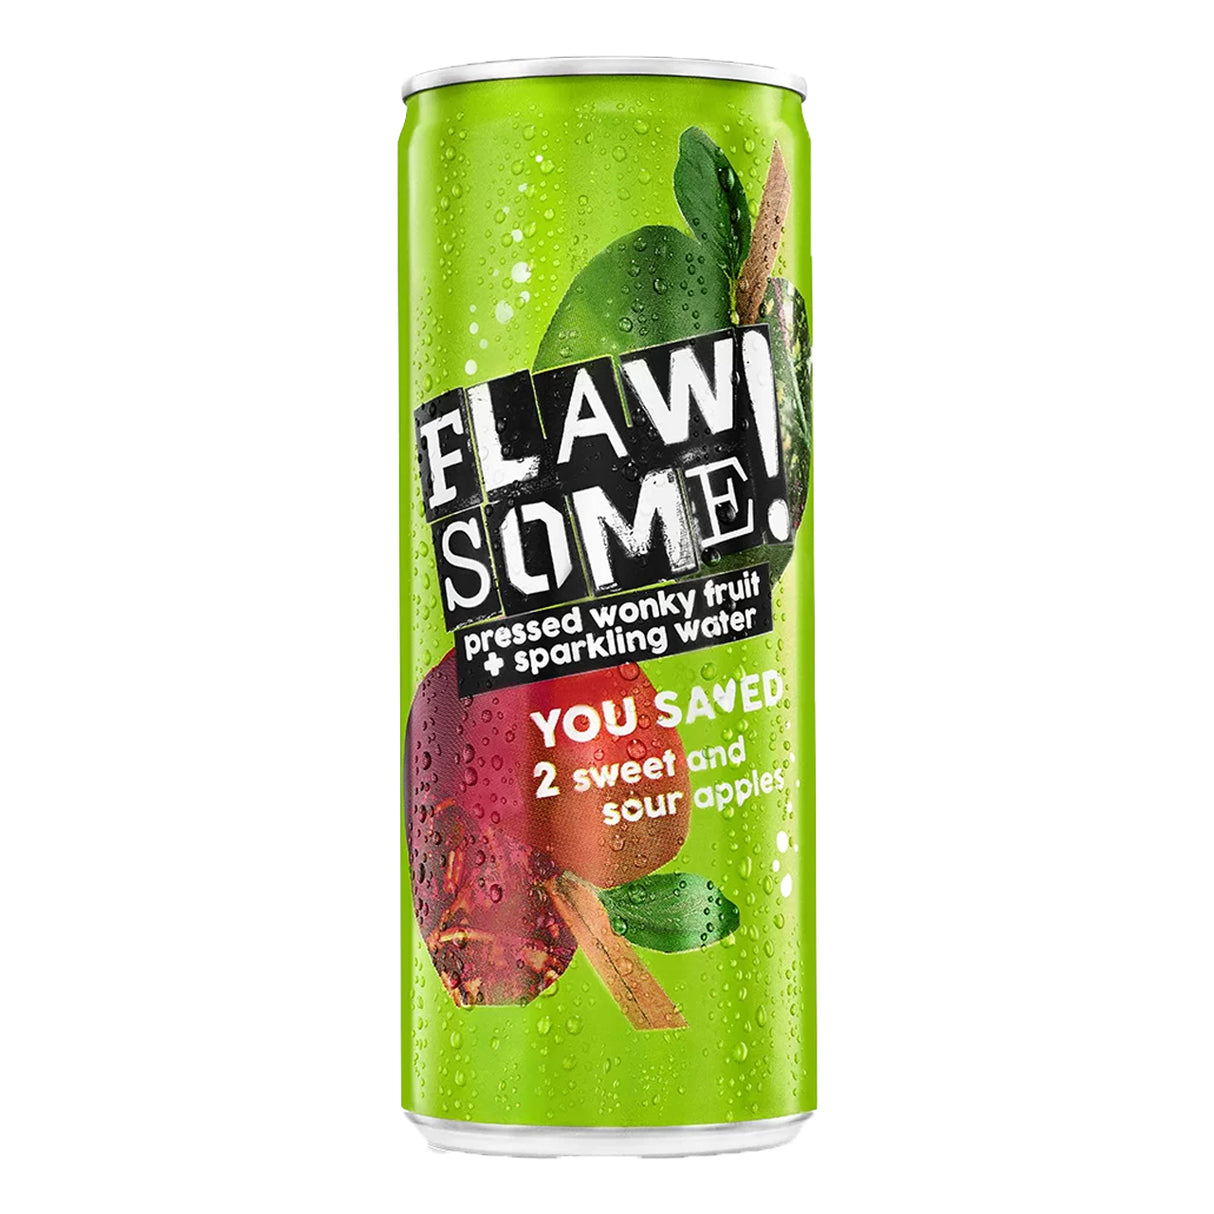 FLAWSOME! DRINKS SWEET & SOUR APPLE SPARKLING CANS (250ml) x 24